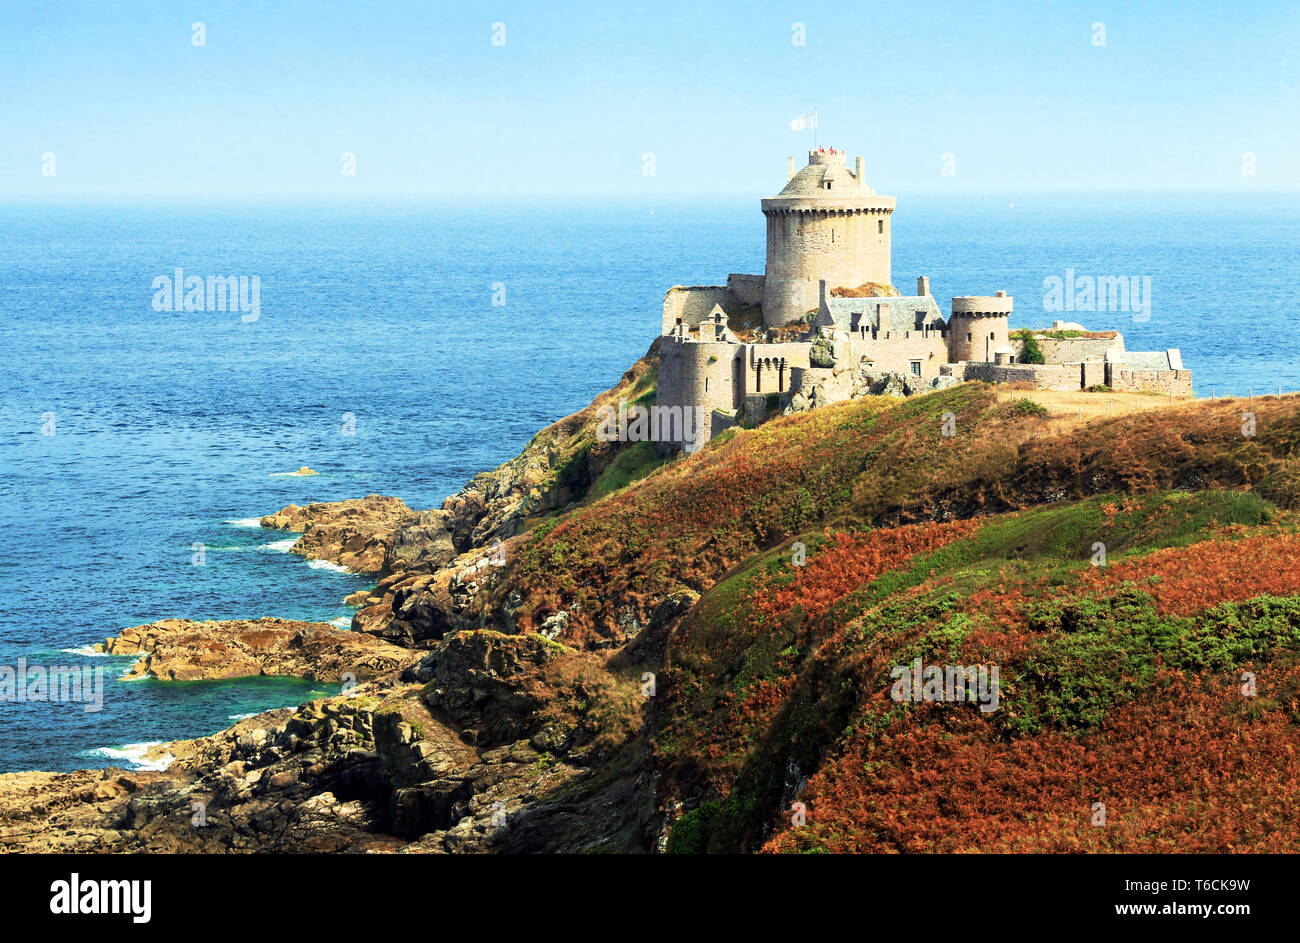 Breton coast point occupied by a fort La Latte in Brittany, France. Stock Photo